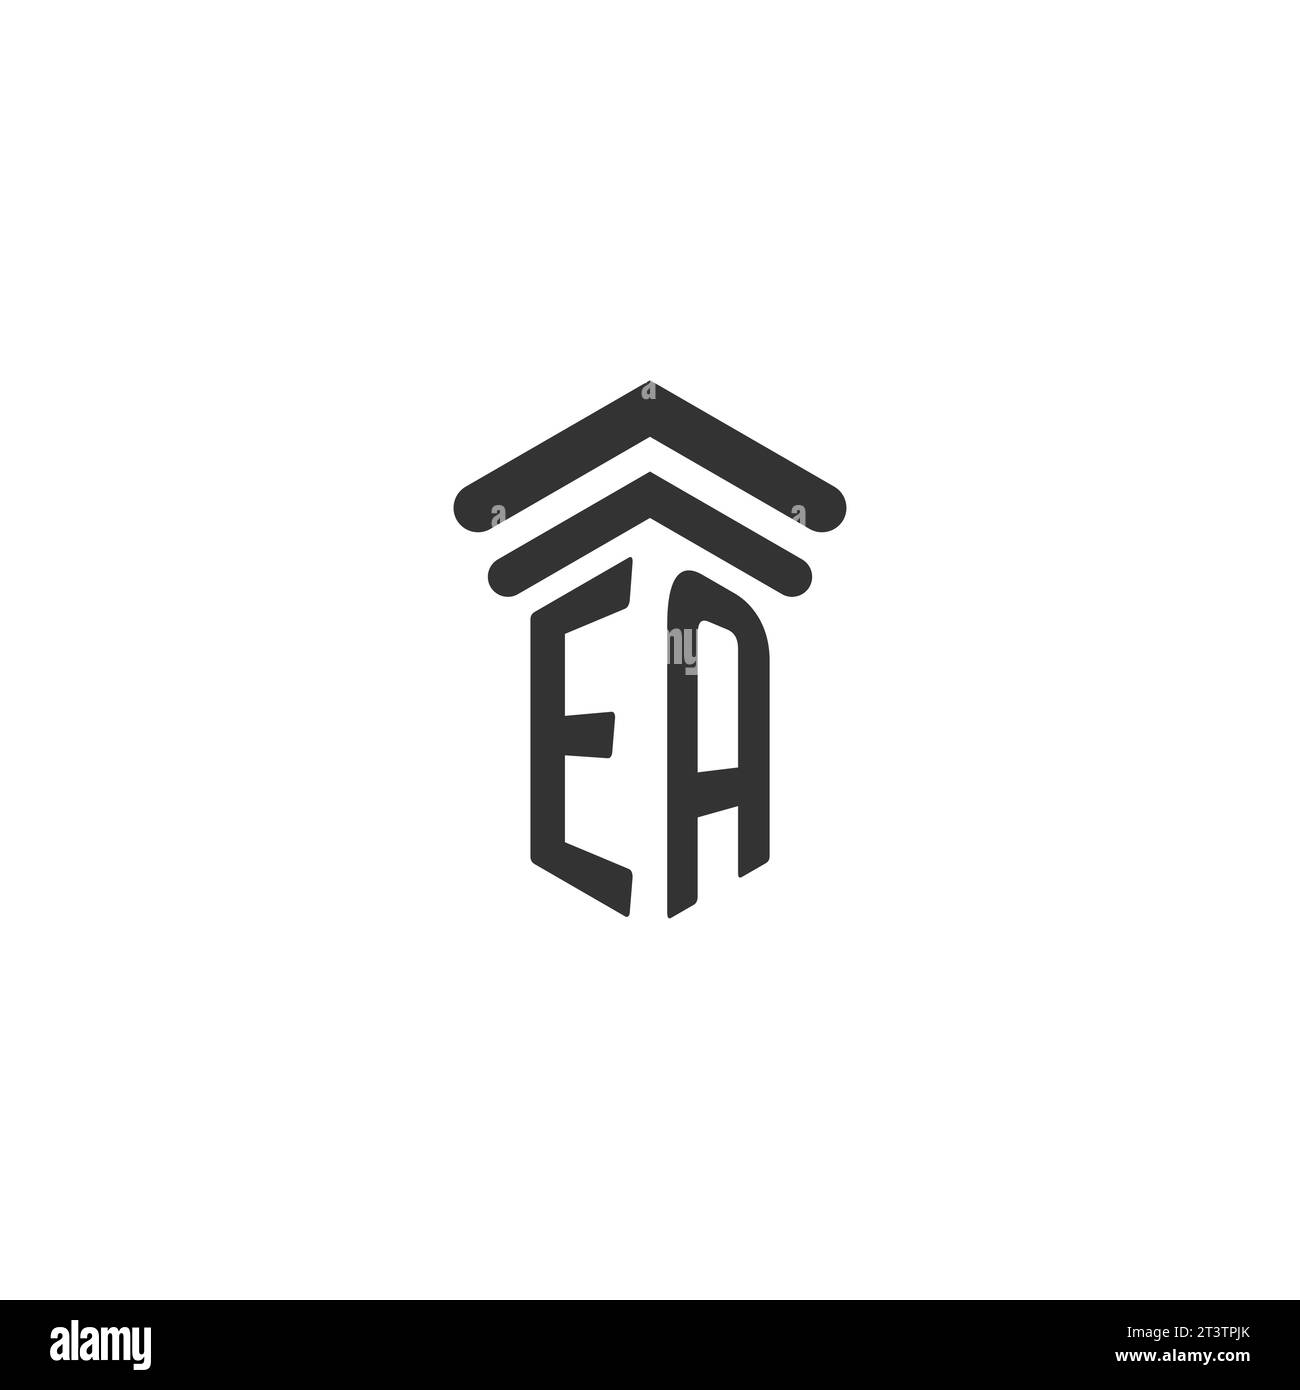 EA initial for law firm logo design template Stock Vector